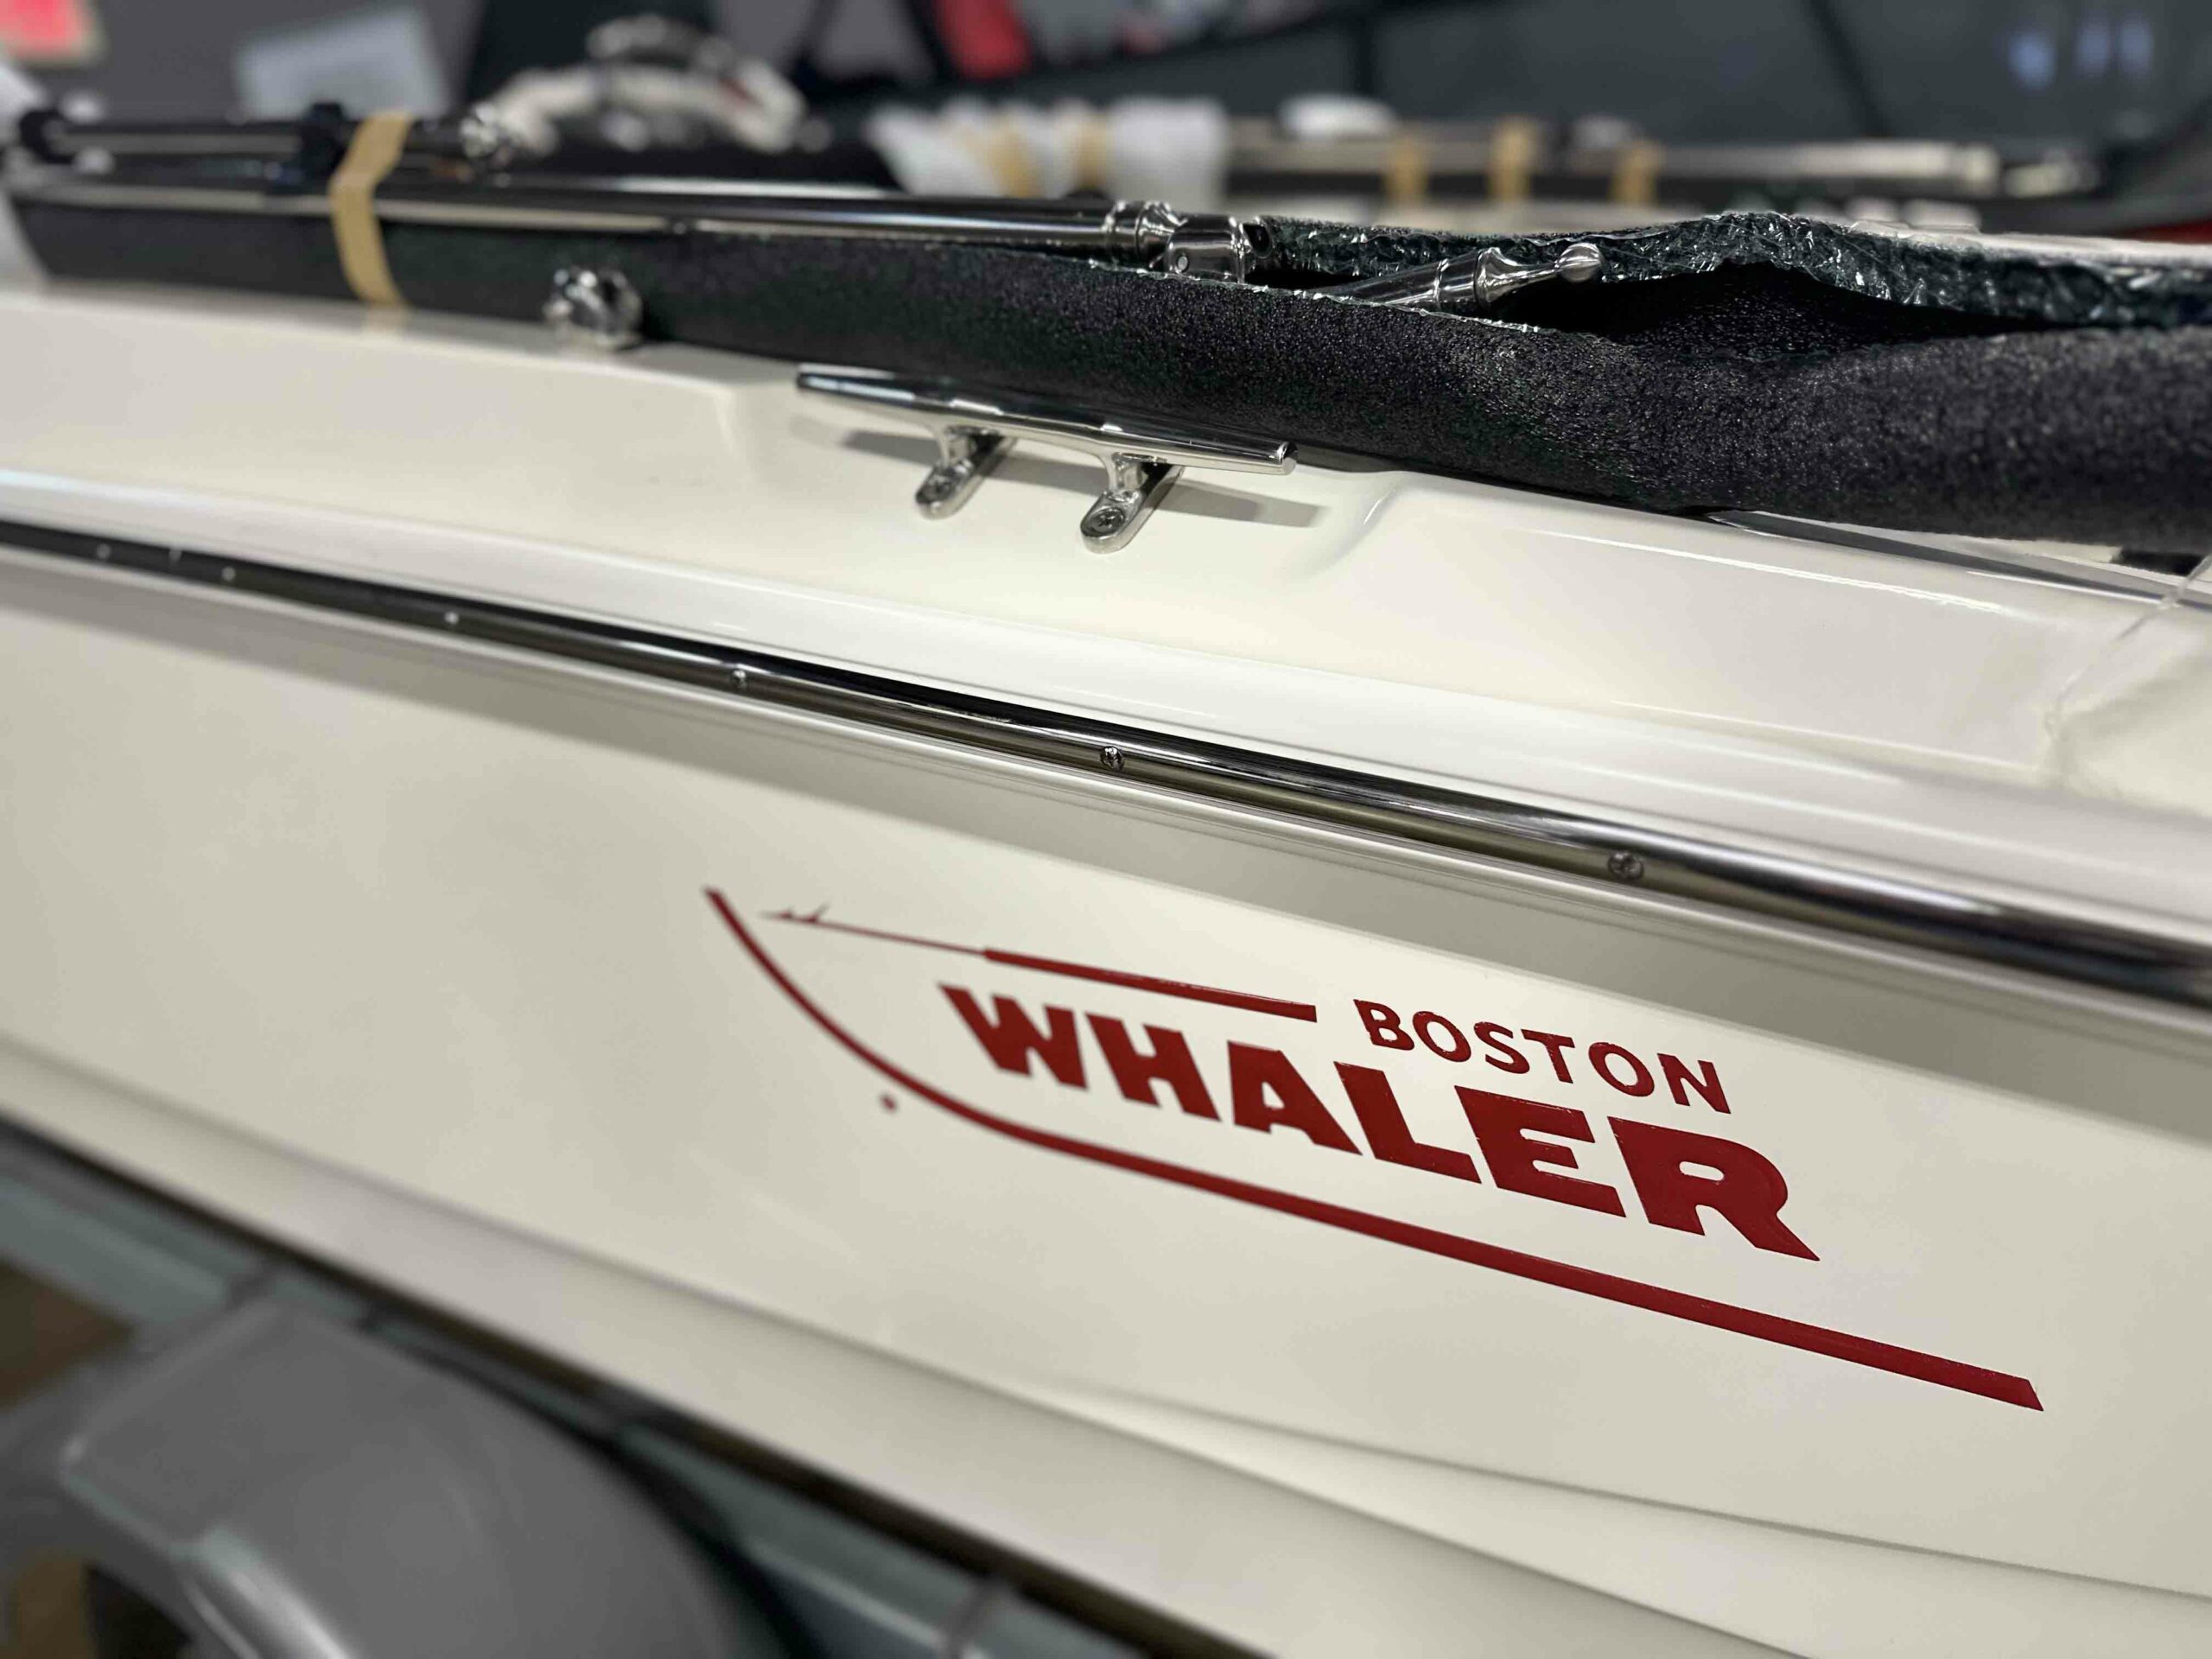 Close up view of the Boston Whaler logo.